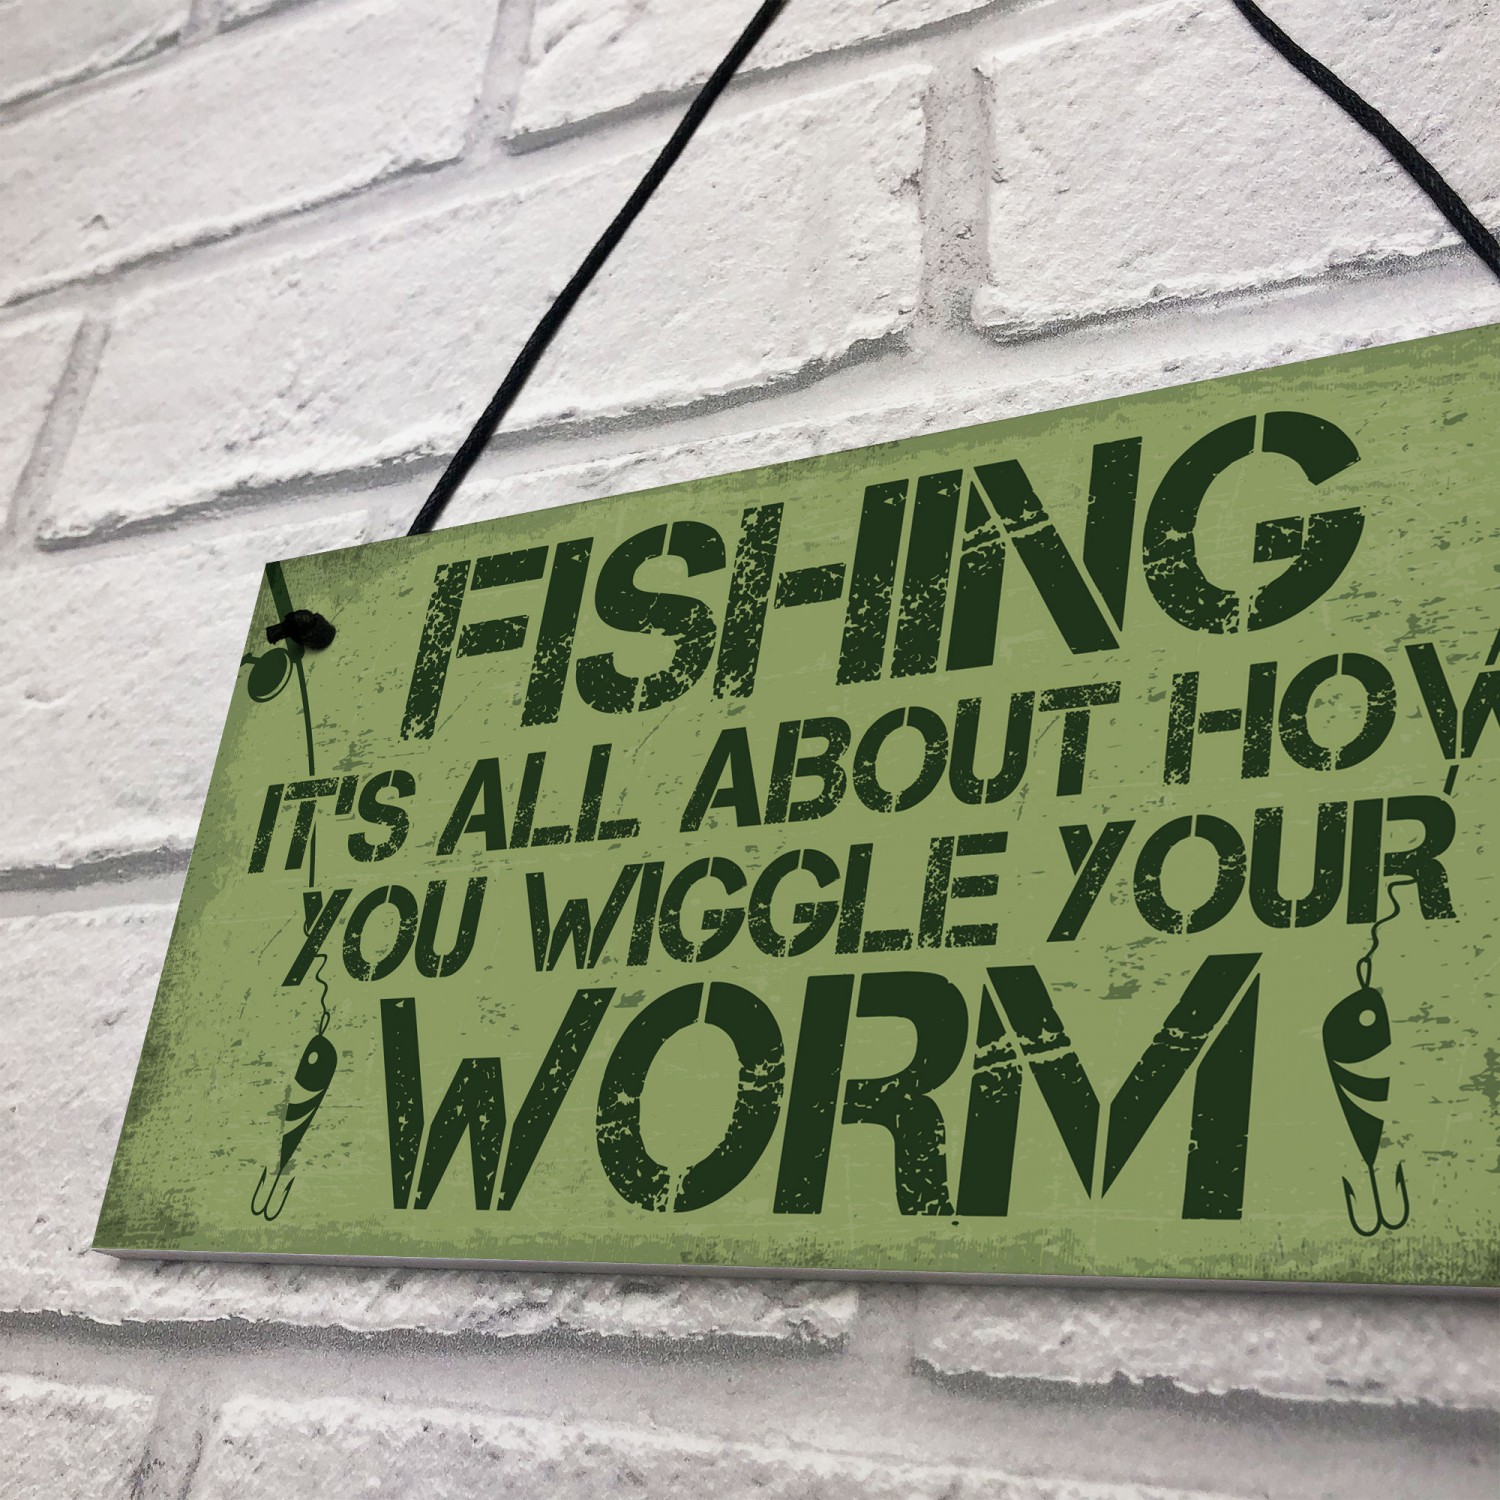 Gone Fishing Sign Plaque Funny Fishing Gifts For Men Man Cave Shed Garage Plaque